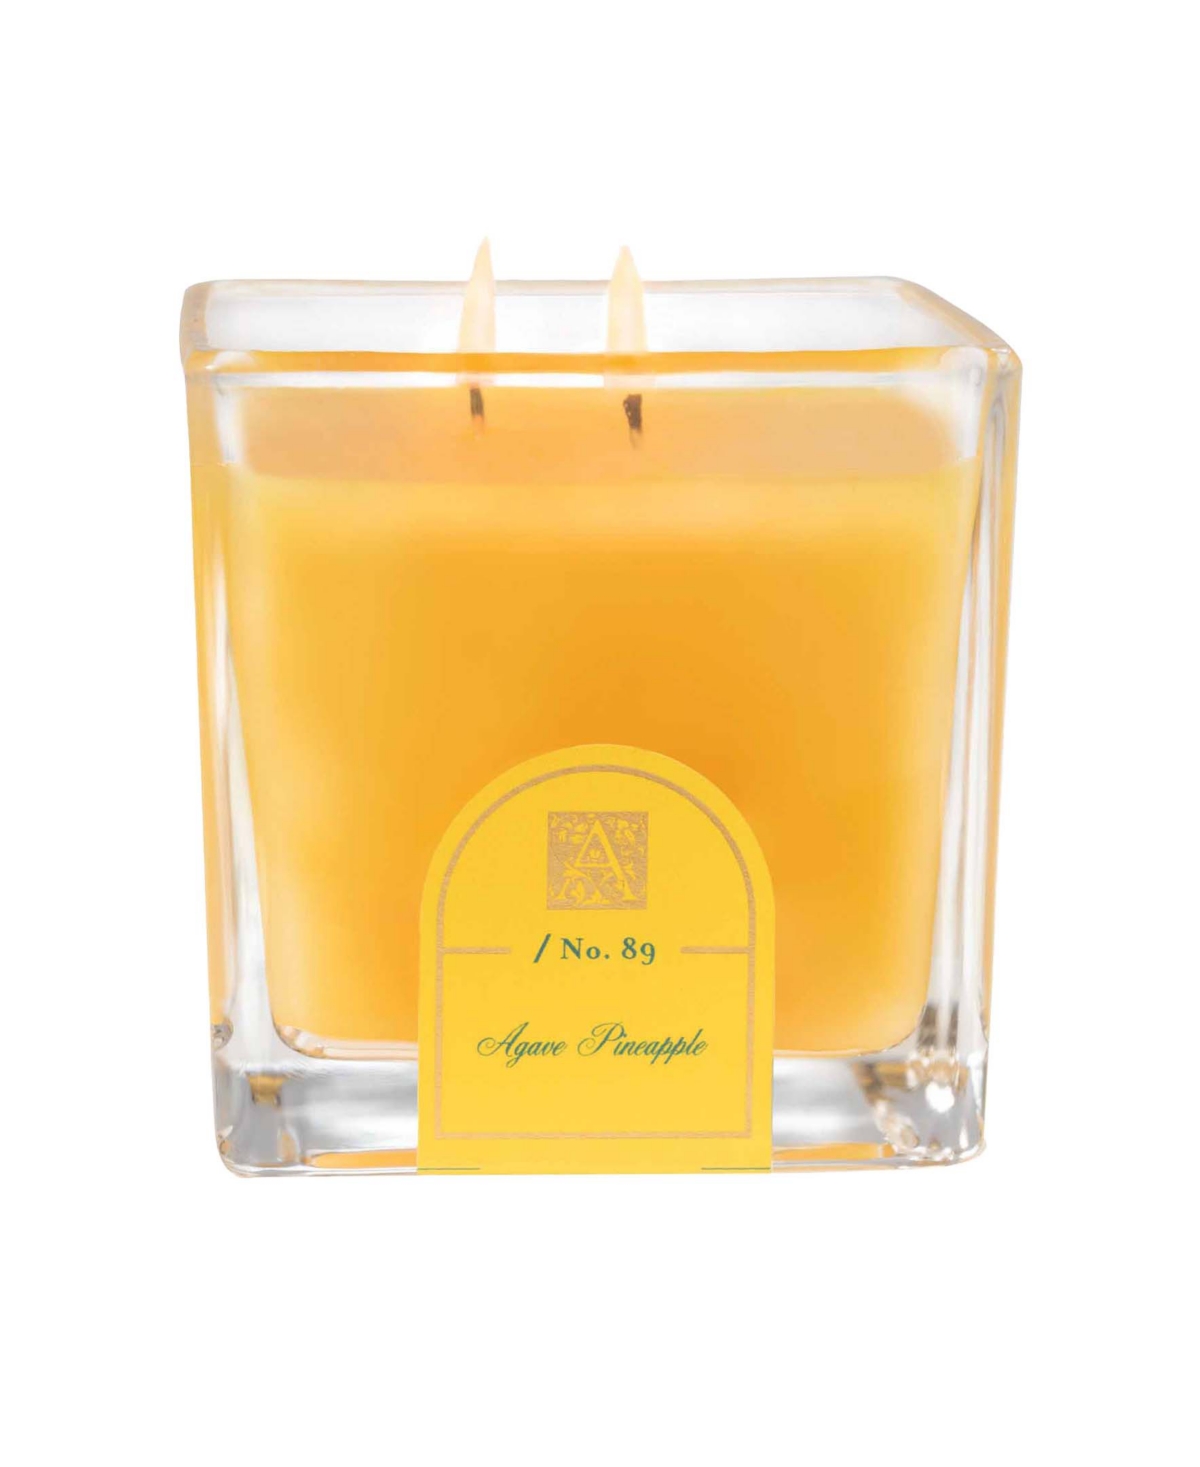 8501458 Aromatique Agave Pineapple Cube Candle sku 8501458